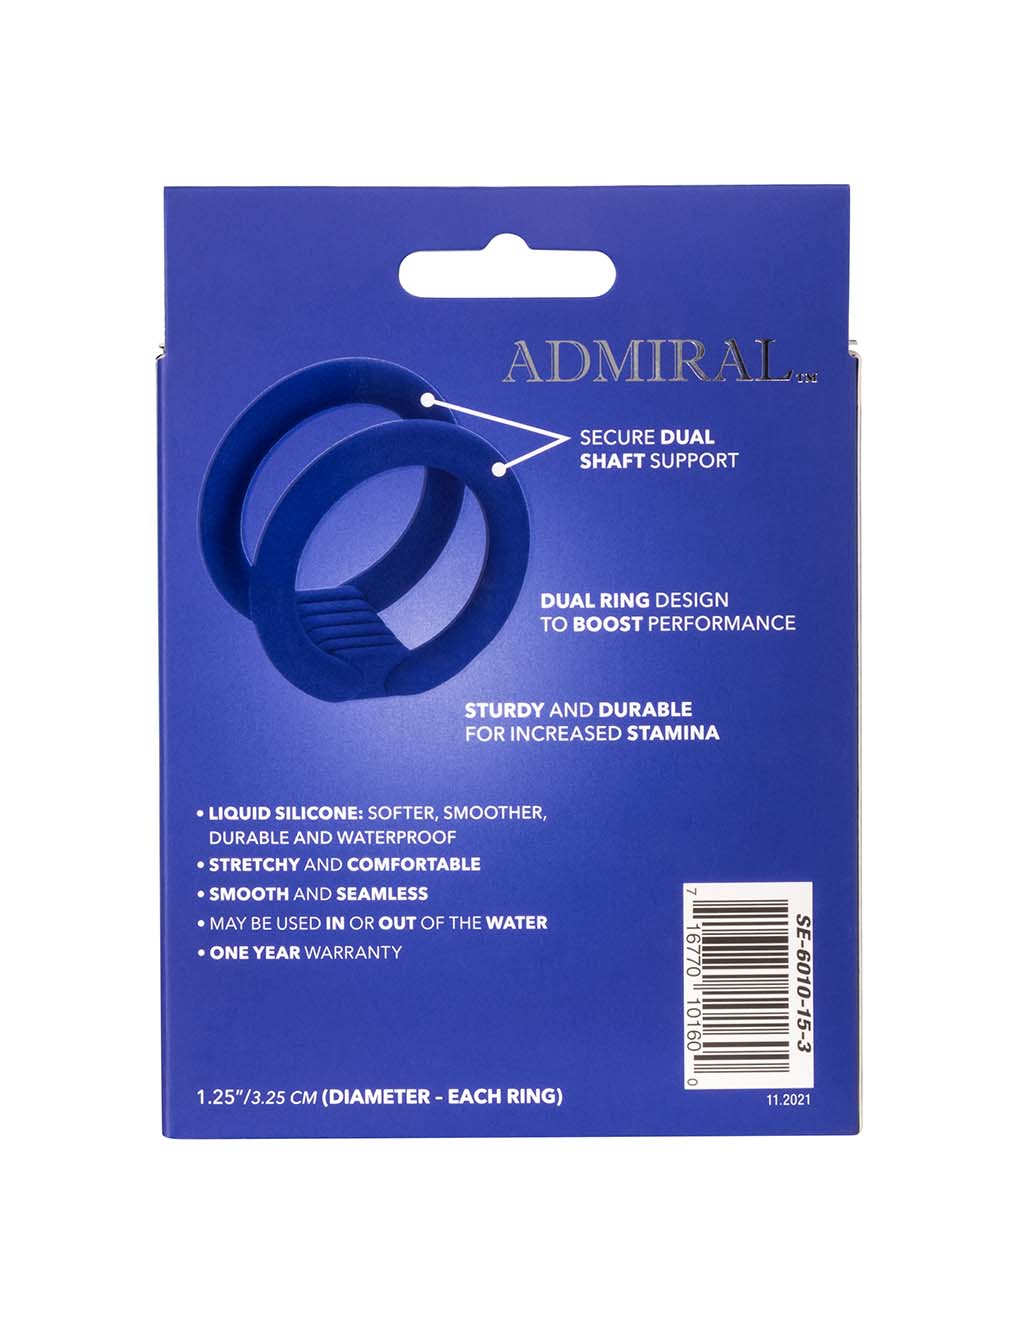 Admiral Dual Cock Cage- Box Back